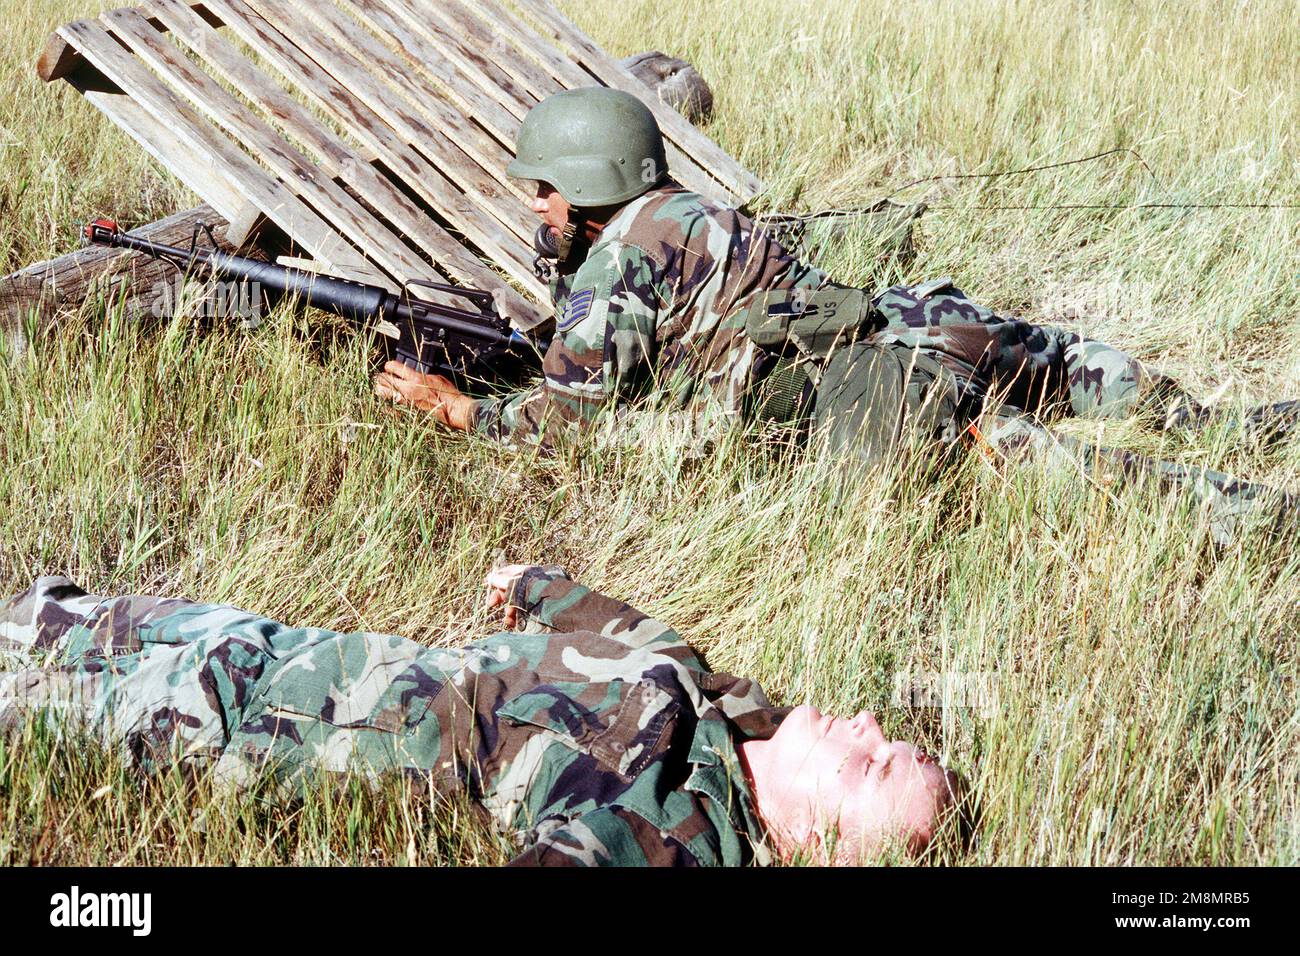 STAFF SGT. Scott Smith, 341st Medical Group, uses a field radio to report his position during an aggressor raid, while casualty STAFF SGT. Floyd Parrish, 341st Medical Group, lies nearby. For two days in late August 1997, the 341st Medical Group conducted a field deployment exercise with simulated attacks and casualties. Nearly two hundred Medical group personnel were deployed to an area that represented a small-scale air transportable hospital under constant threat of attack. The medical personnel were required to continue medical operations while maintaining their perimeter defense. Base: Ma Stock Photo